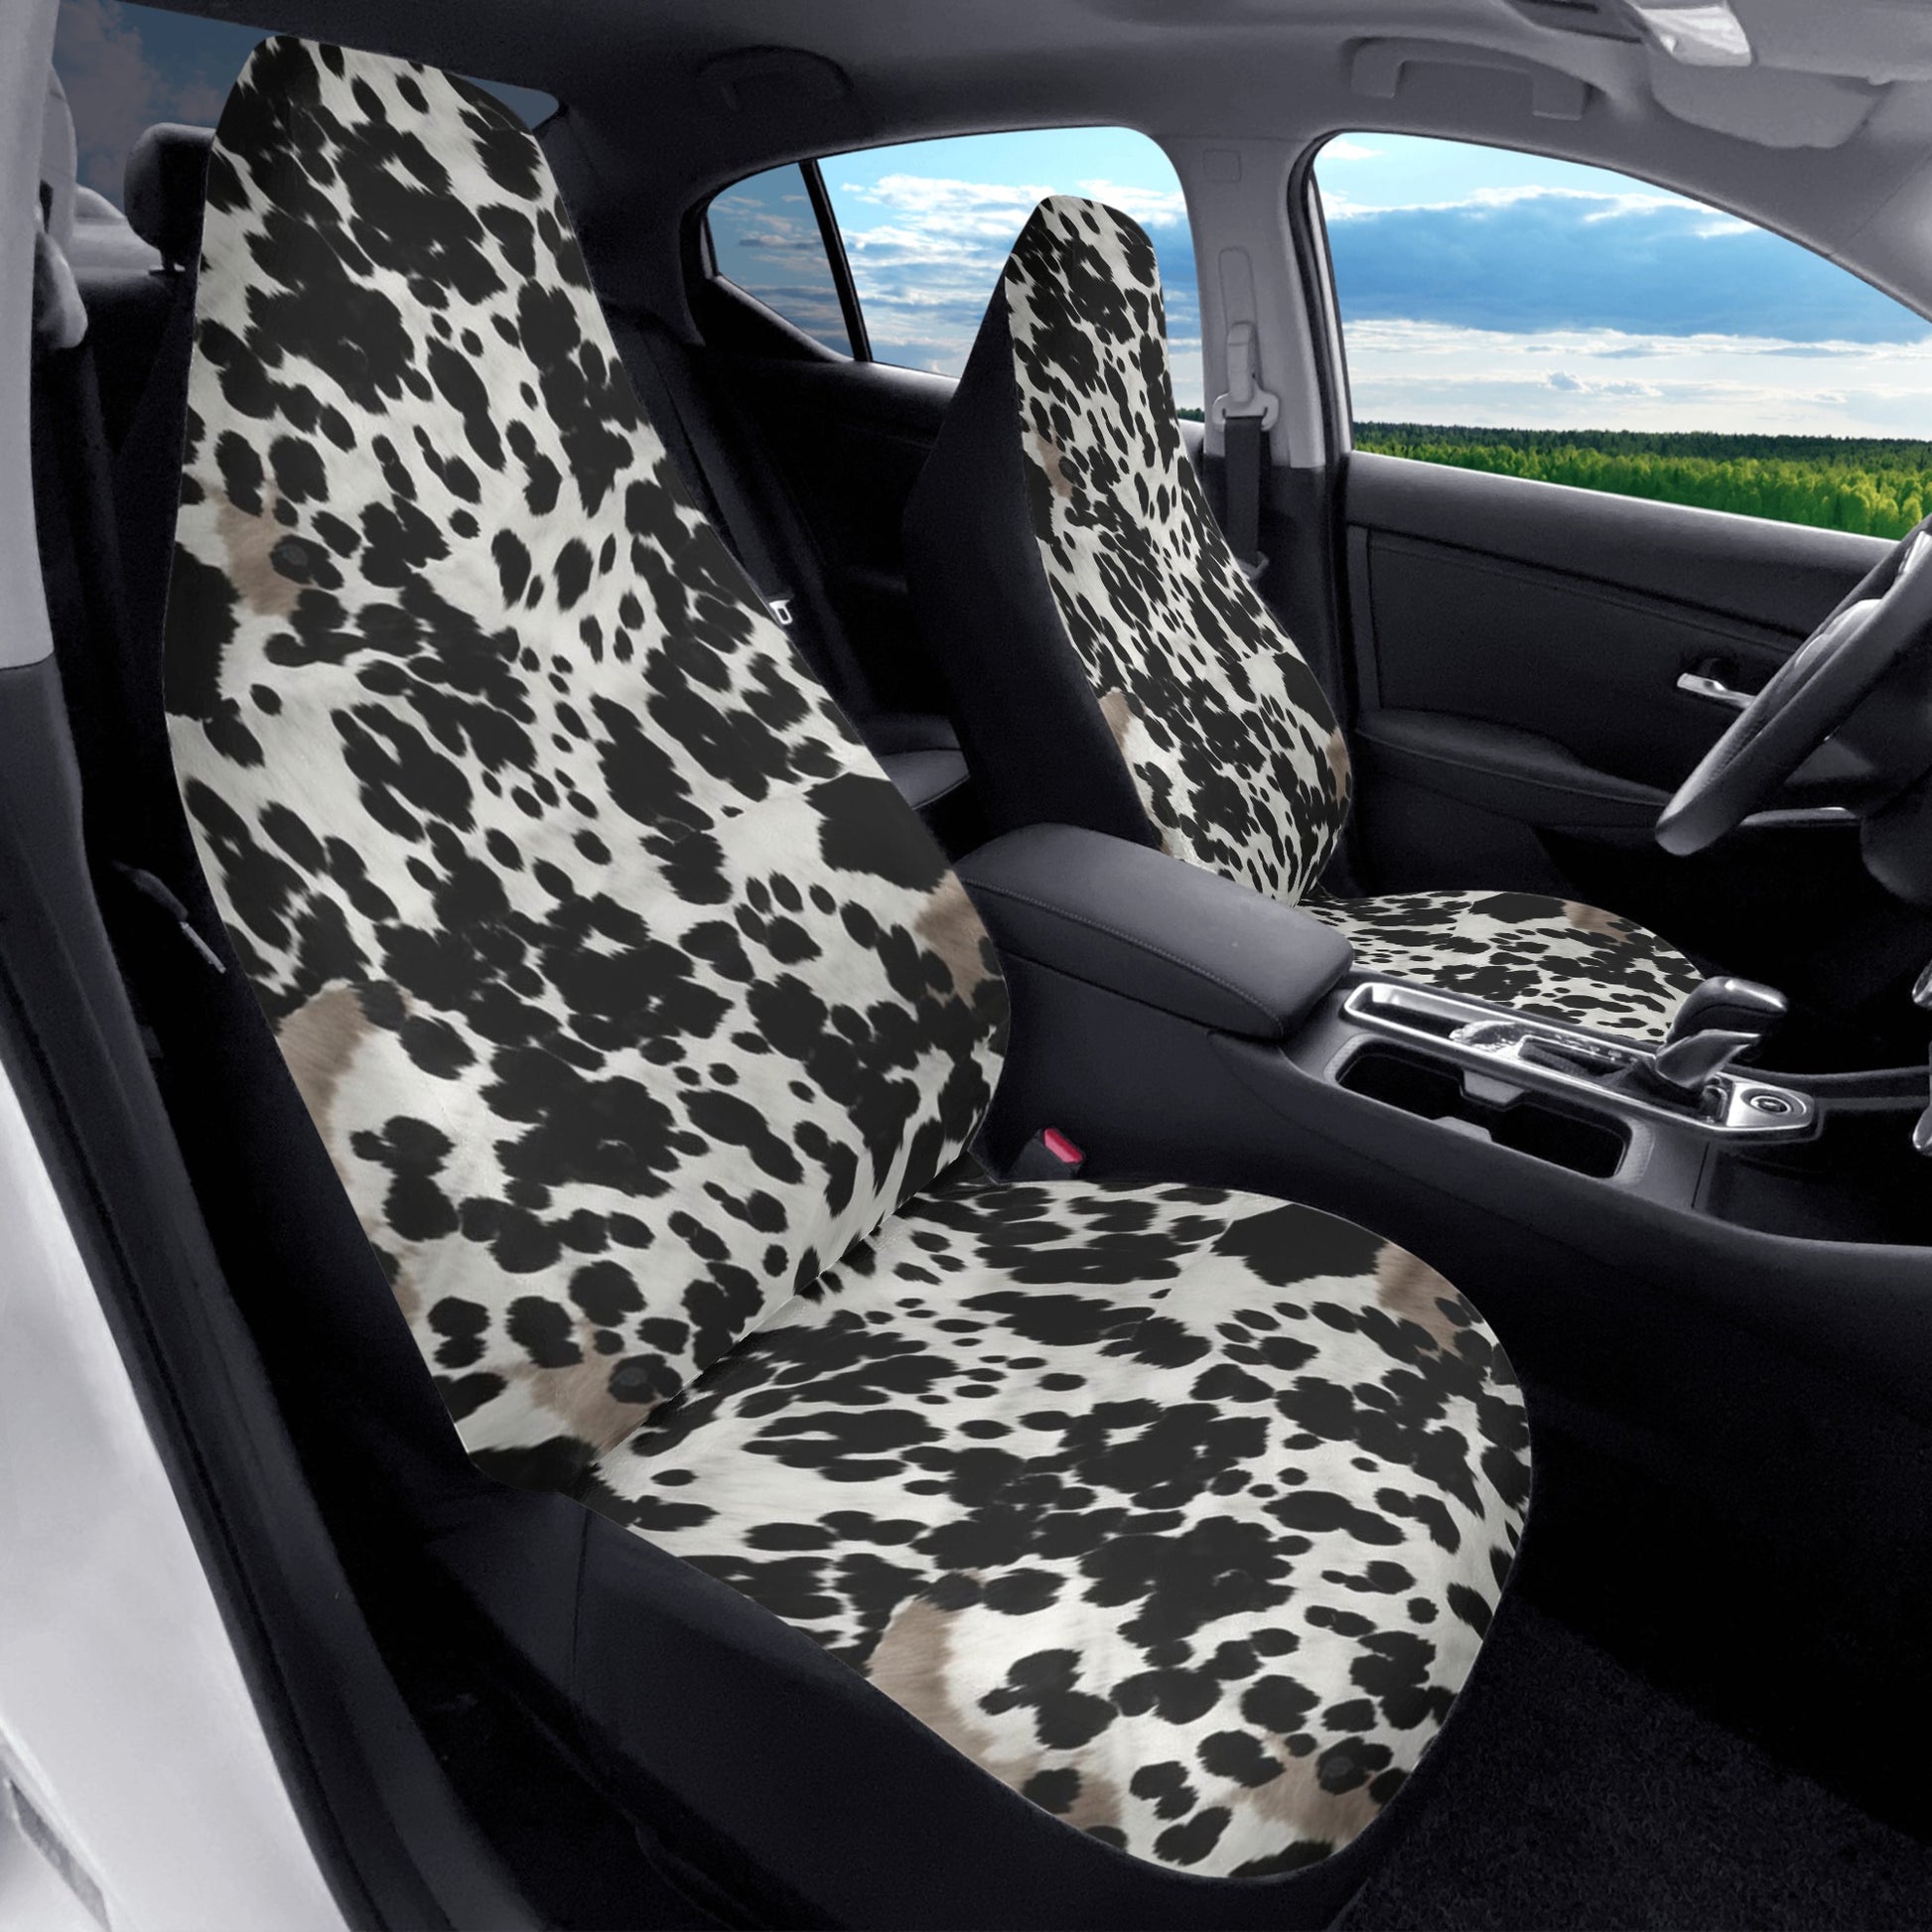 Cow Print Car Seat Covers (2 pcs), Black White Brown Pattern Auto Front Seat Dog Pet Vehicle SUV Universal Protector Accessory Men Women Starcove Fashion